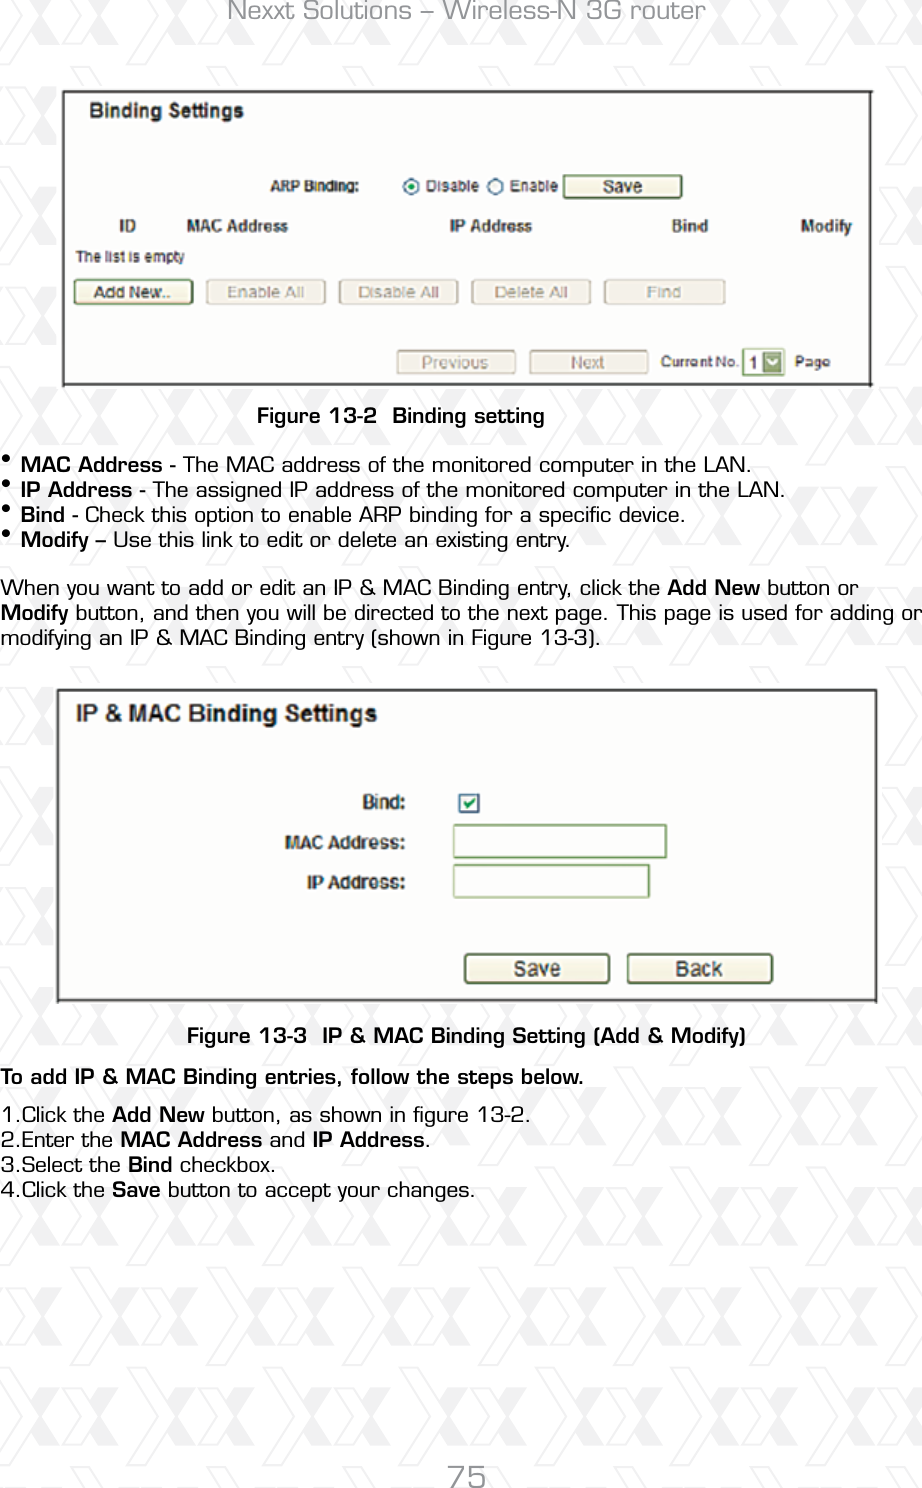 Nexxt Solutions – Wireless-N 3G router75Figure 13-2  Binding settingFigure 13-3  IP &amp; MAC Binding Setting (Add &amp; Modify)To add IP &amp; MAC Binding entries, follow the steps below.MAC Address - The MAC address of the monitored computer in the LAN. IP Address - The assigned IP address of the monitored computer in the LAN. Bind - Check this option to enable ARP binding for a speciﬁc device. Modify – Use this link to edit or delete an existing entry. When you want to add or edit an IP &amp; MAC Binding entry, click the Add New button or Modify button, and then you will be directed to the next page. This page is used for adding or modifying an IP &amp; MAC Binding entry (shown in Figure 13-3).  ••••Click the Add New button, as shown in ﬁgure 13-2. Enter the MAC Address and IP Address.Select the Bind checkbox. Click the Save button to accept your changes.1.2.3.4.